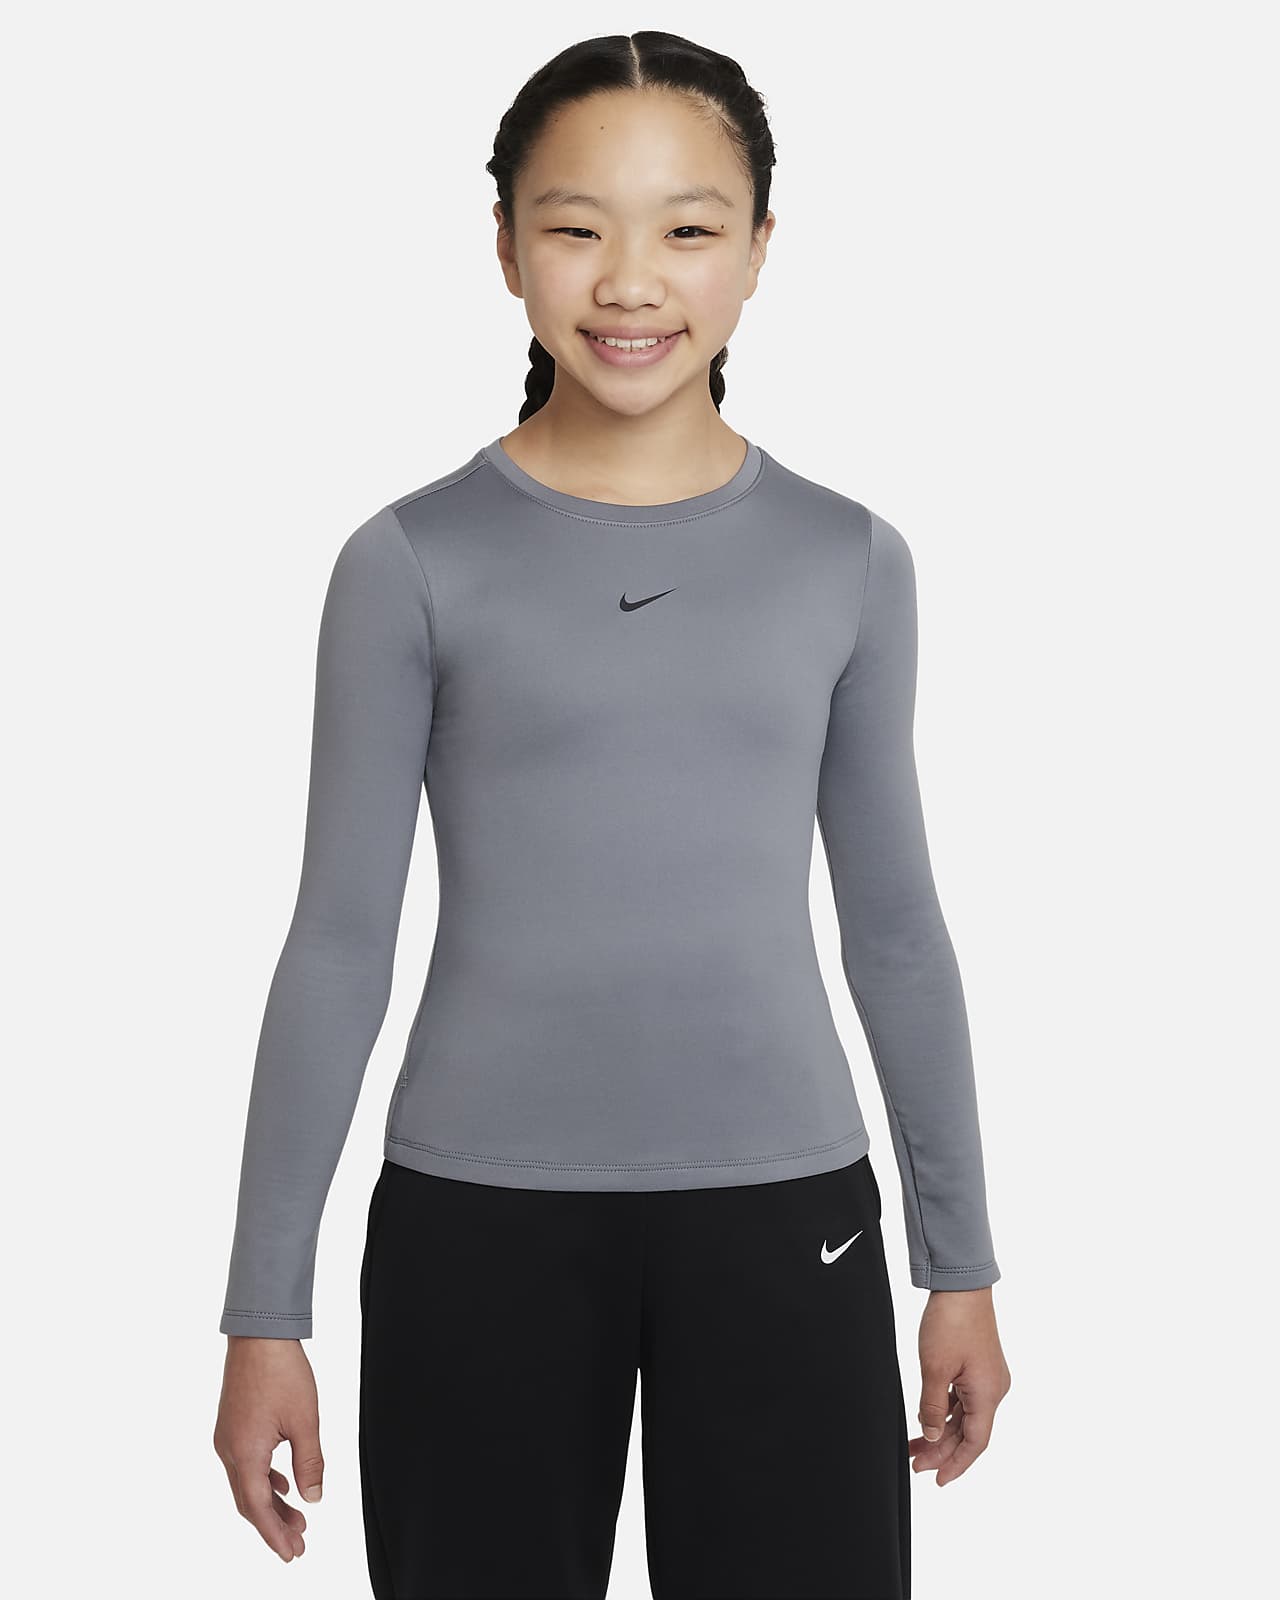 Nike One Big Kids' Therma-FIT Long-Sleeve Training Top.